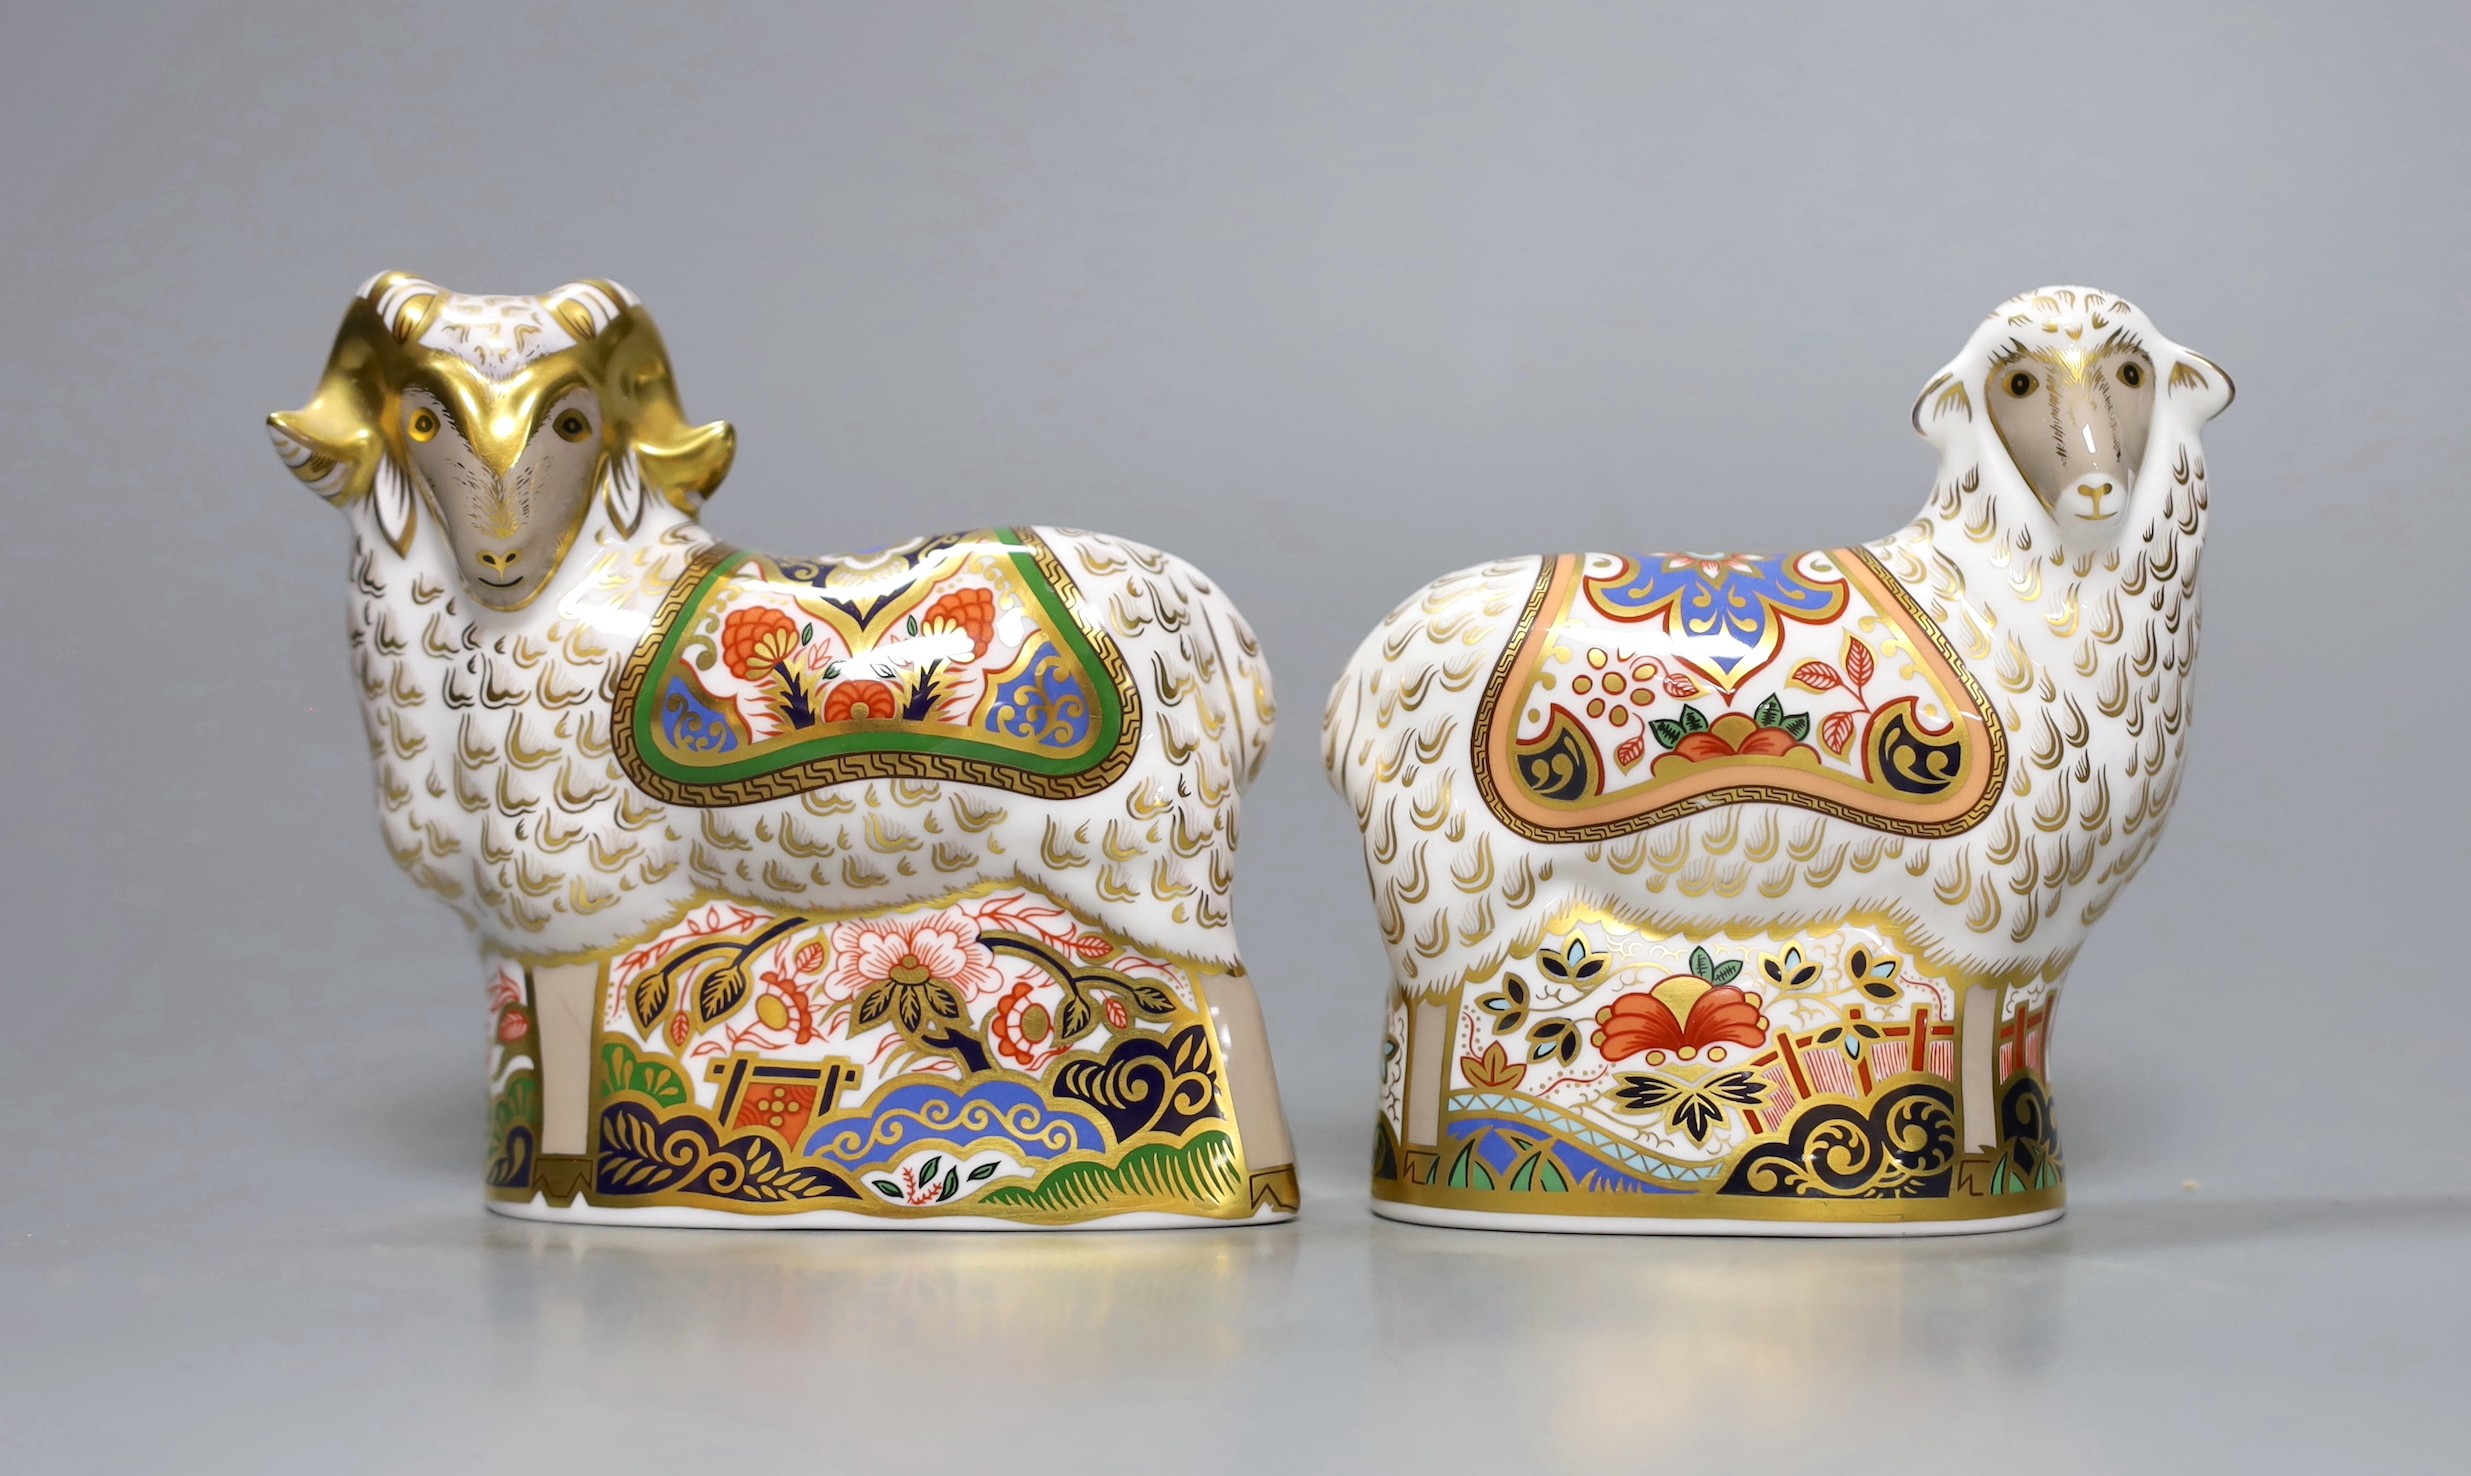 Two Royal Crown Derby paperweight - Imari Ram, gold stopper, boxed, no certificate and Imari Ram, gold stopper, boxed, no certificate